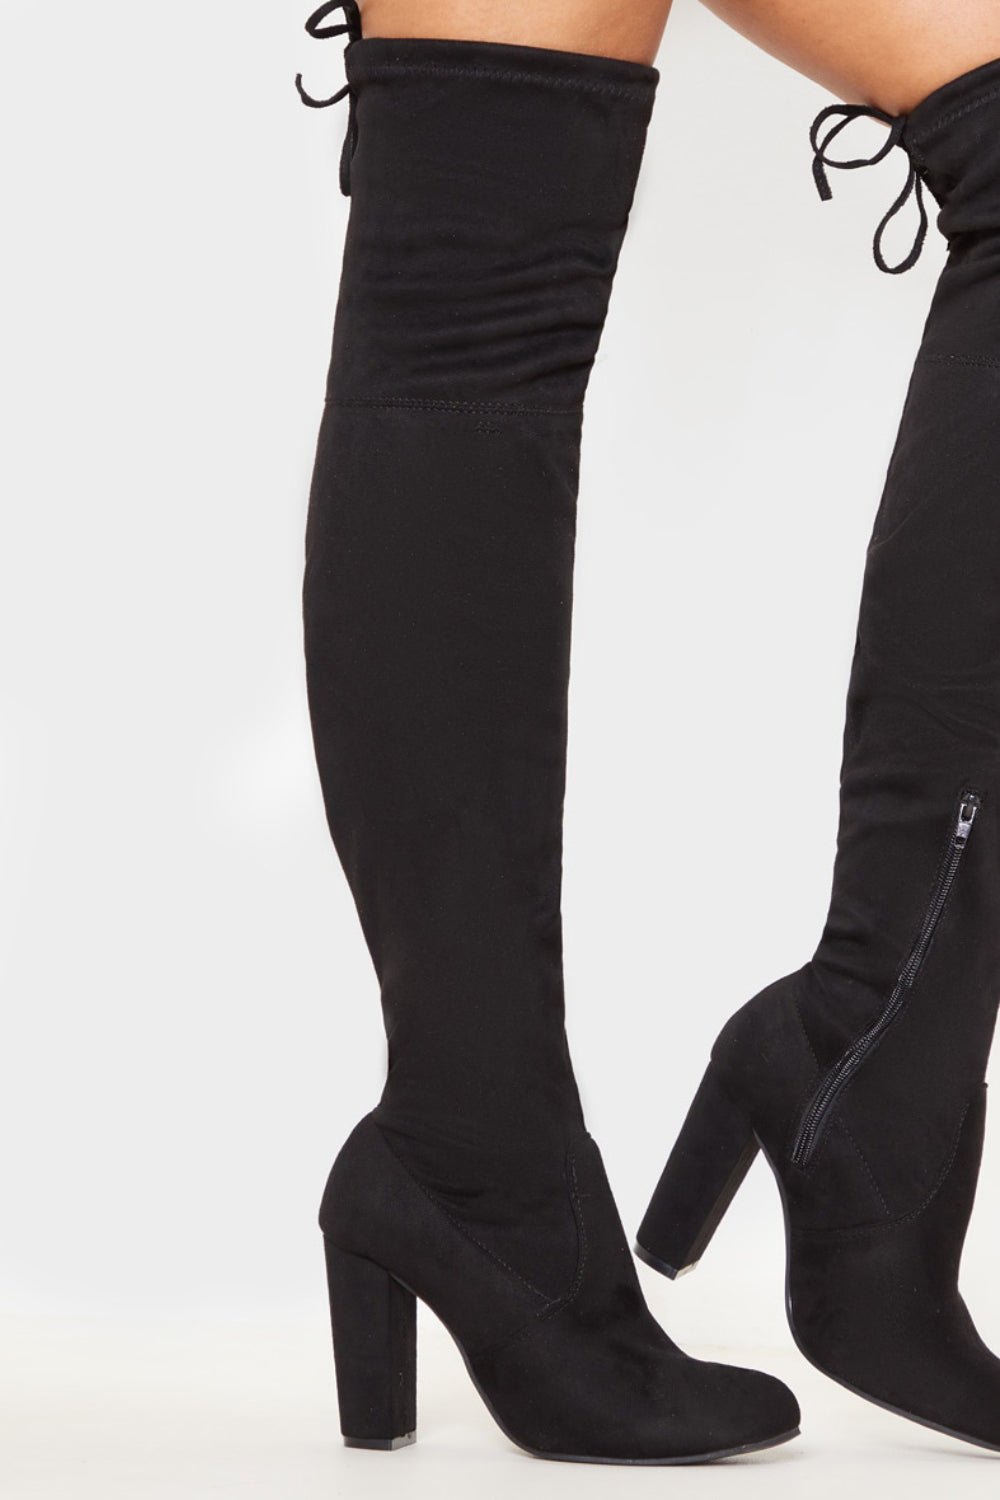 Buy Linzi Black Scout Faux Suede Square Toe Heeled Boots With Side Zip from  the Next UK online shop